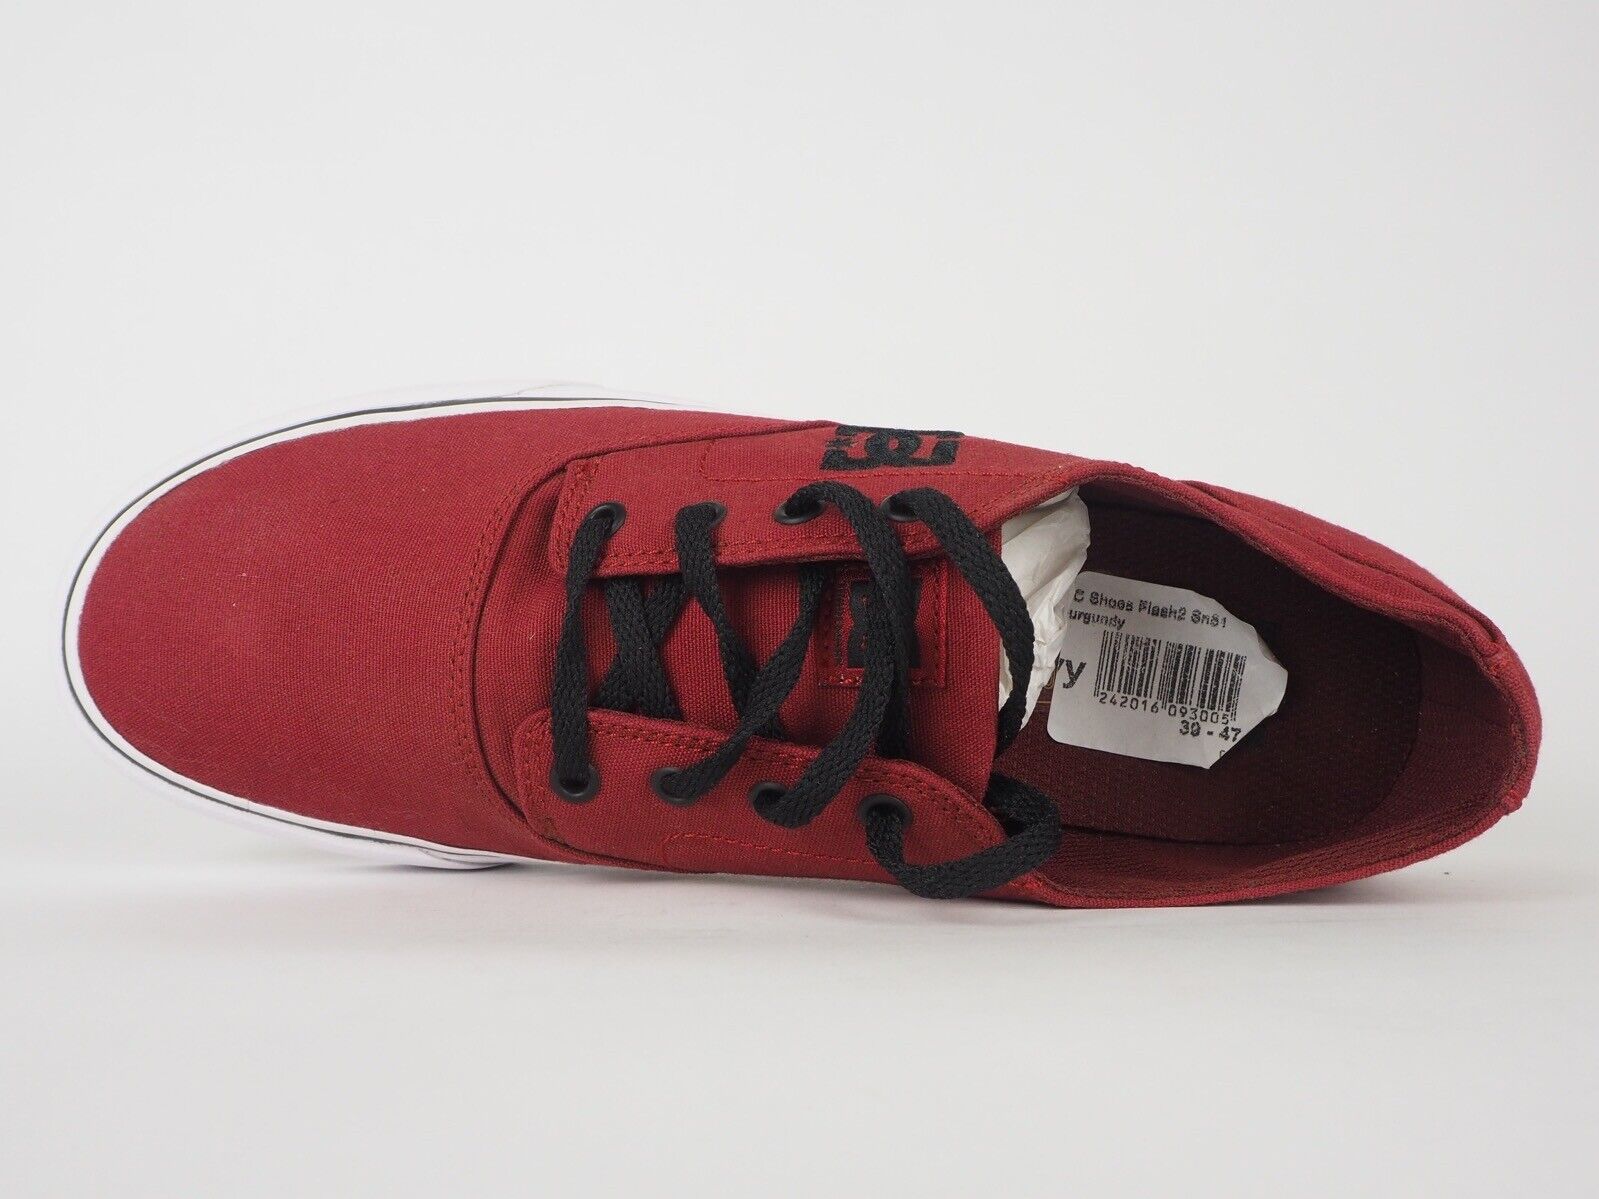 Mens DC Trainers Flash 2 Burgundy Canvas Lace Up Trainers UK 7 EU 40.5 - London Top Style